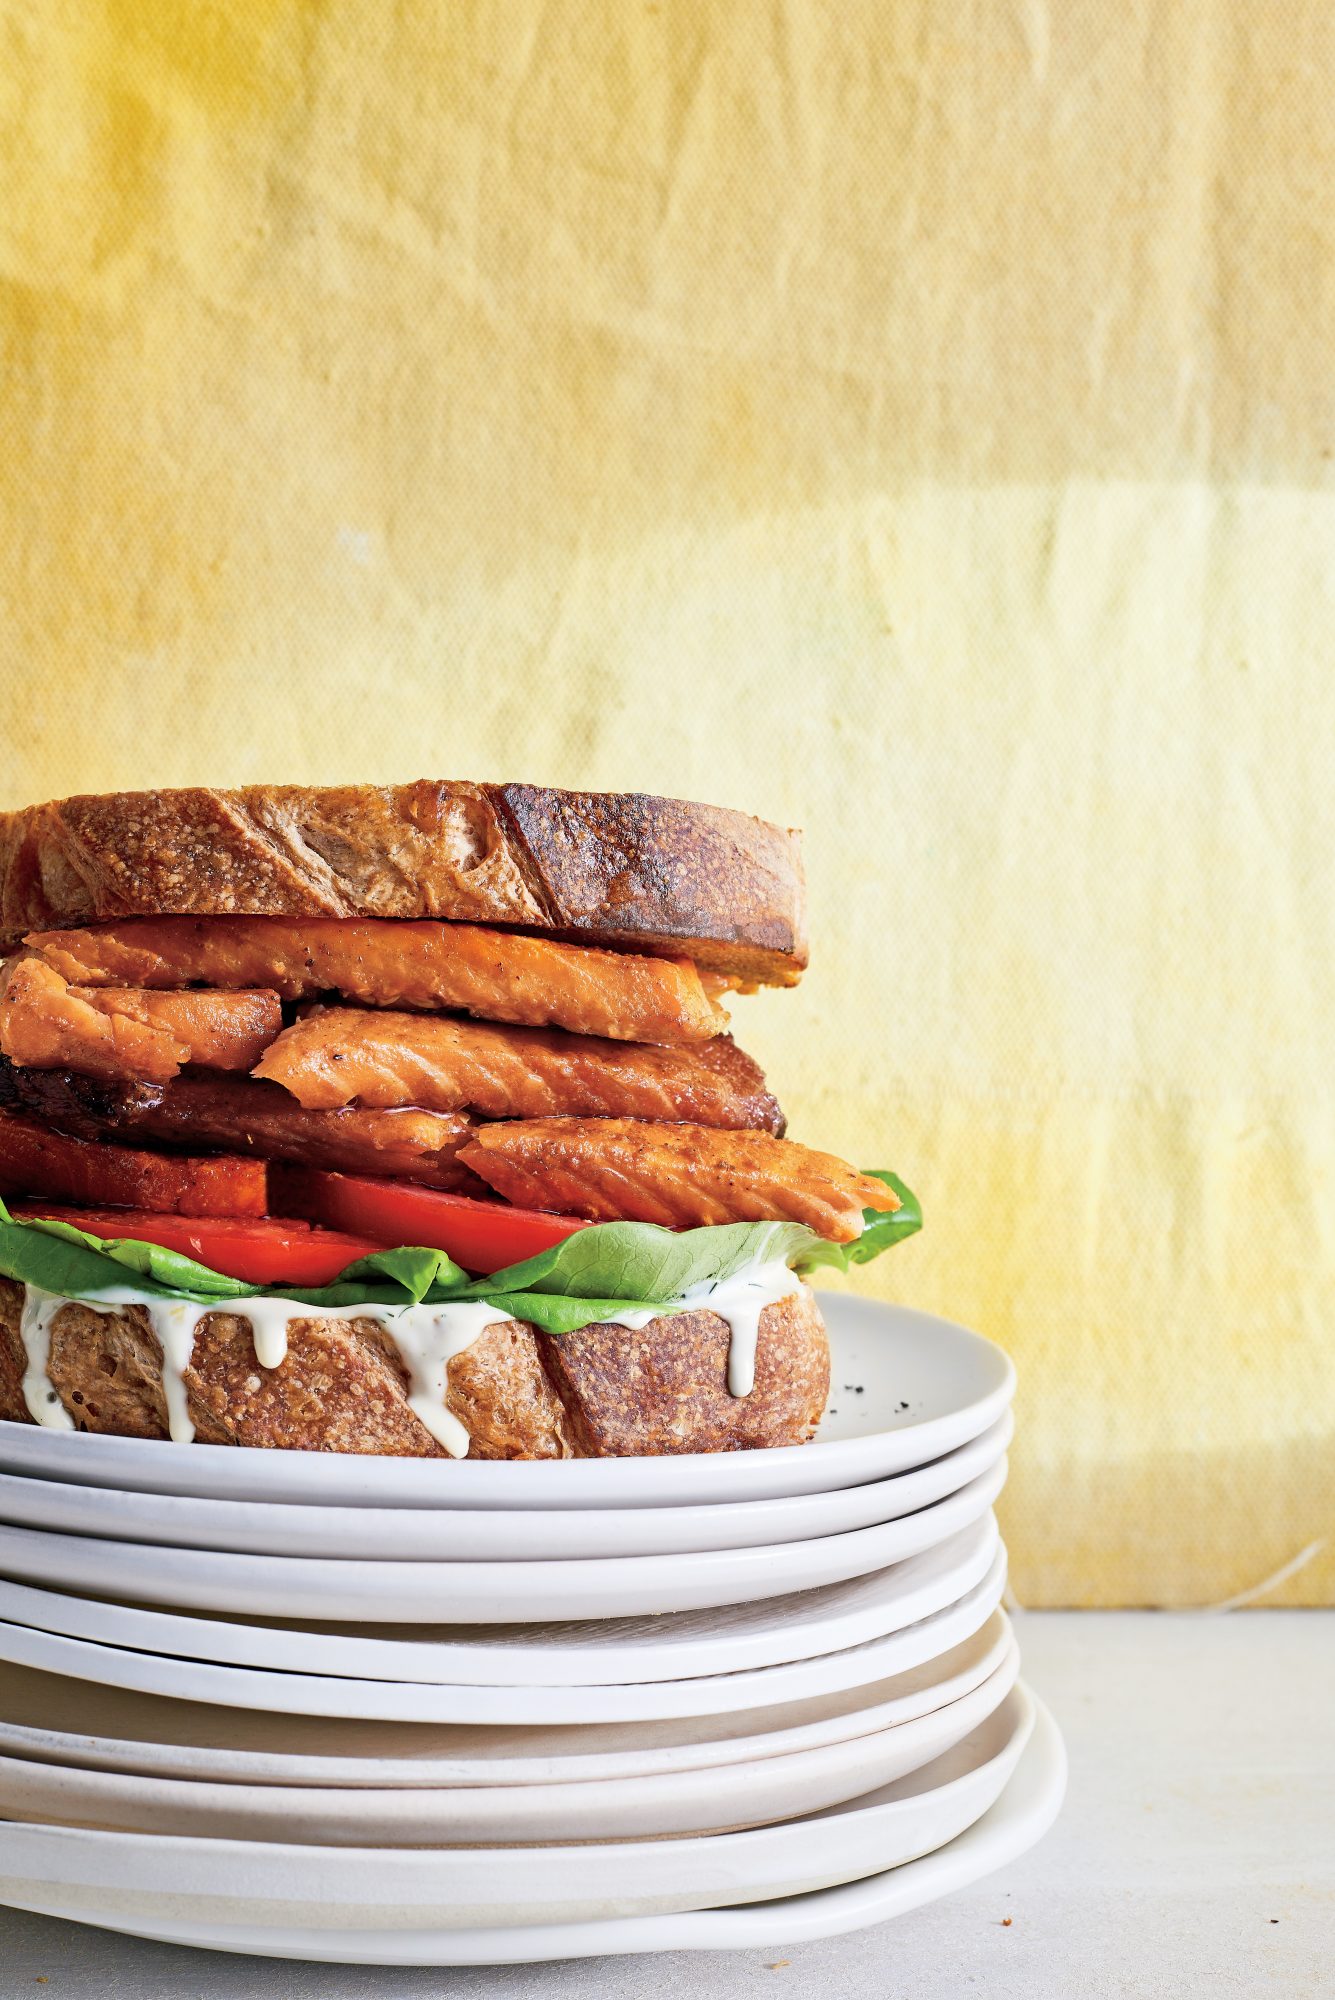 cl-Salmon-Belly BLT with Lemon-Black Pepper Mayo